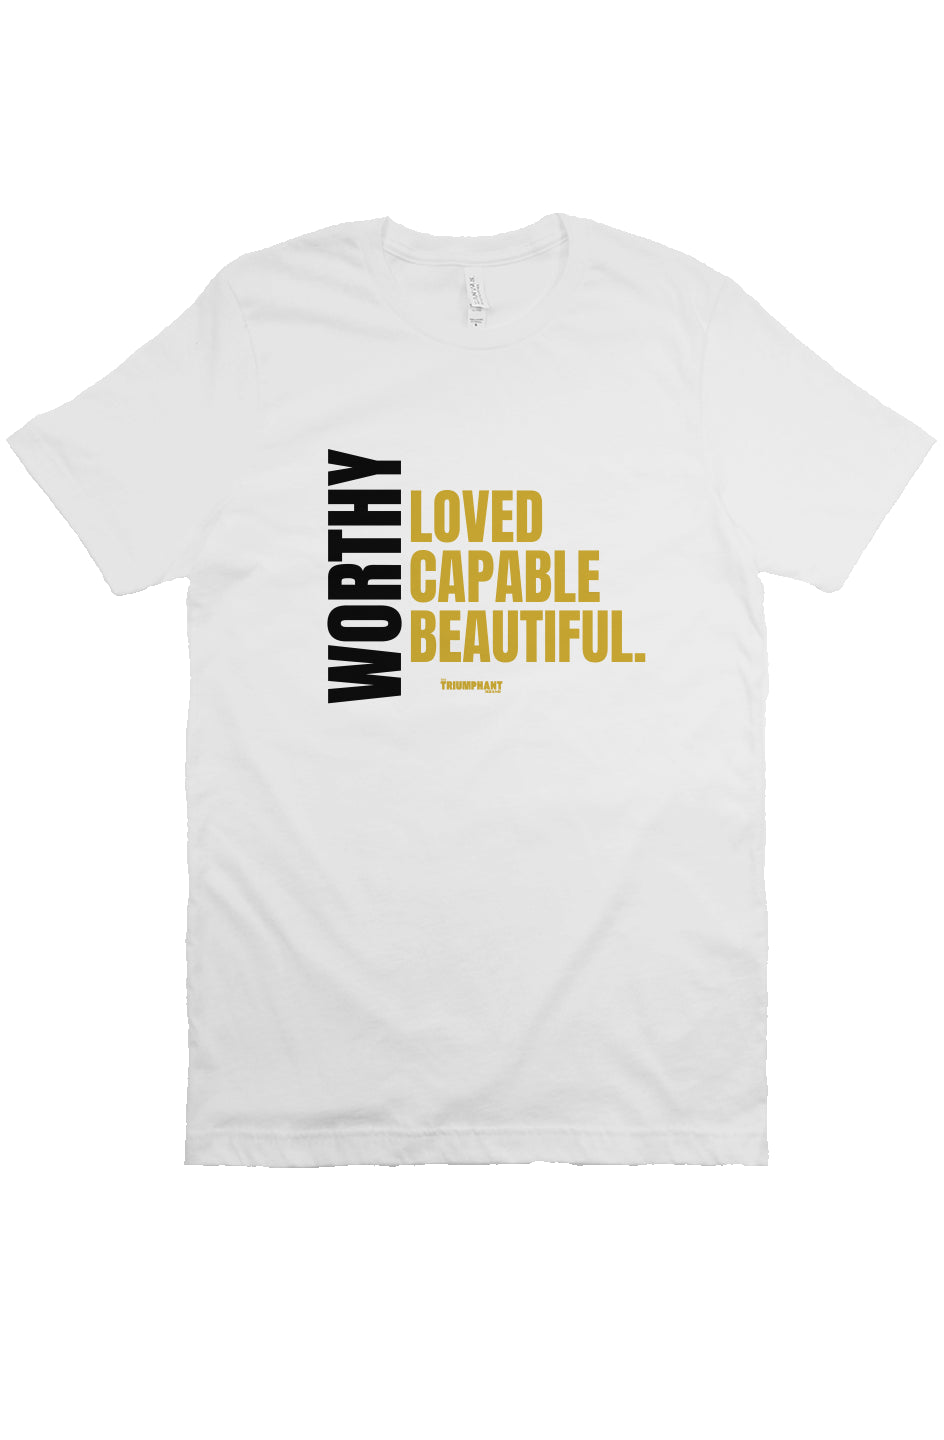 Worthy, Loved, Capable, Beautiful. | Triumphant Tee